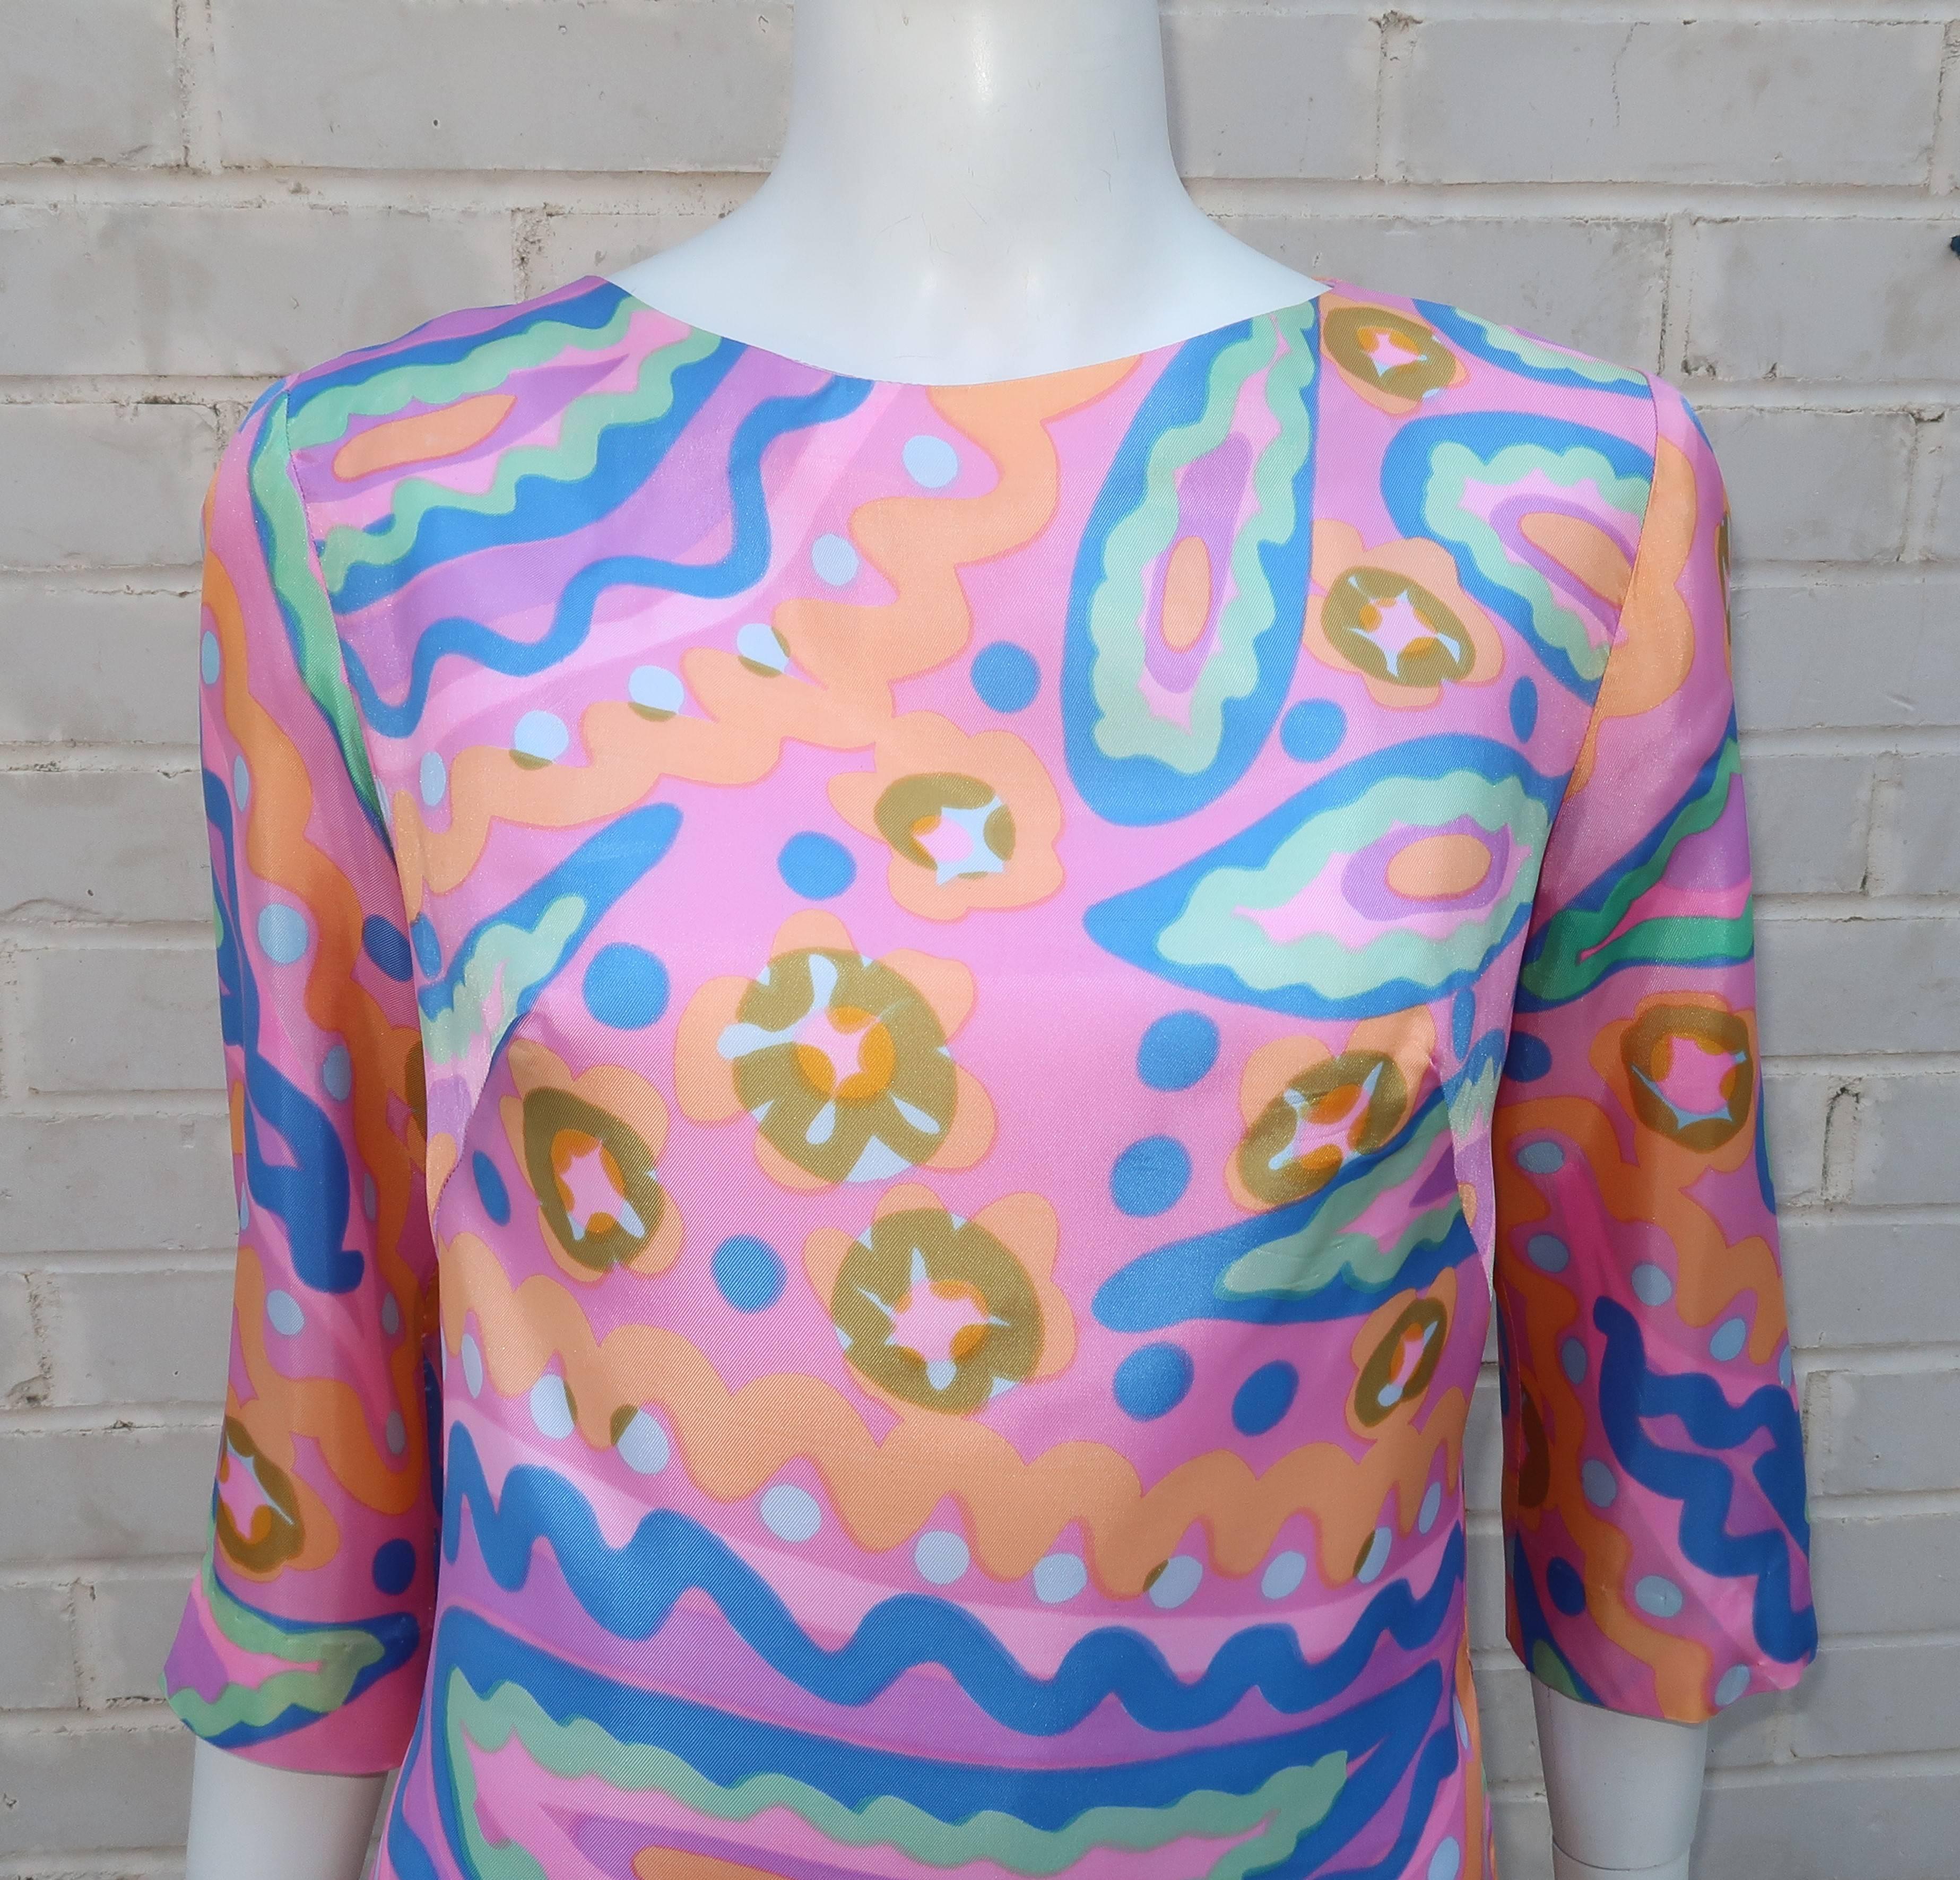 The easy California lifestyle and look of the 1960's is epitomized in Alex Colman's cropped top in candy colors and a mod print.  The silhouette is designed to fit across the shoulders with a free flowing bodice accentuated by rounded side vents and